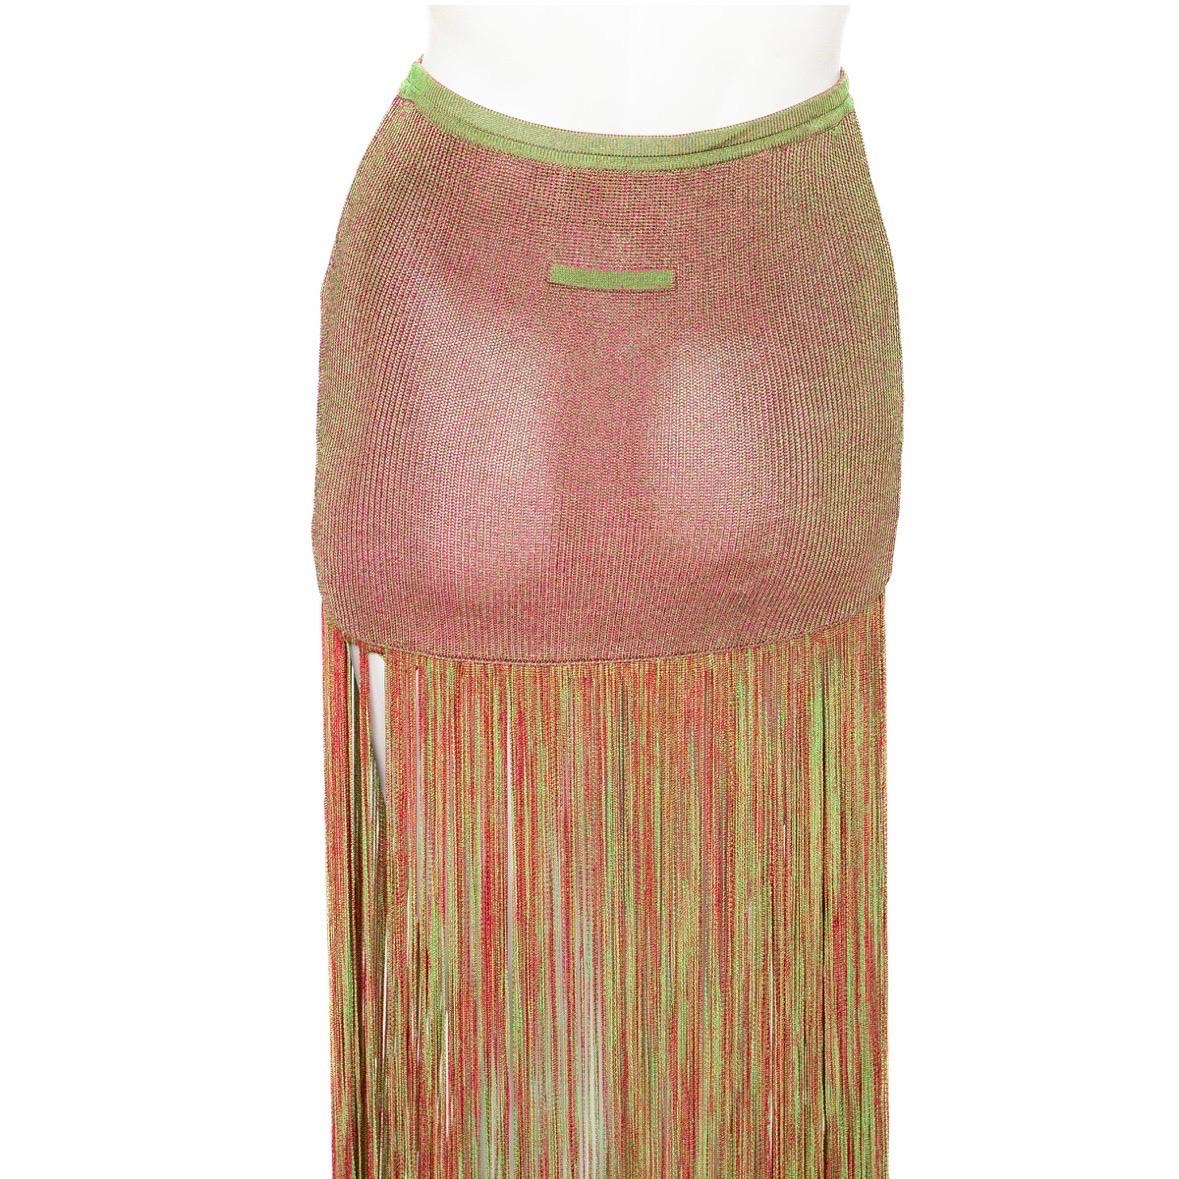 Jean Paul Gaultier 1980s Equator Fringed Three-Piece Set For Sale 3